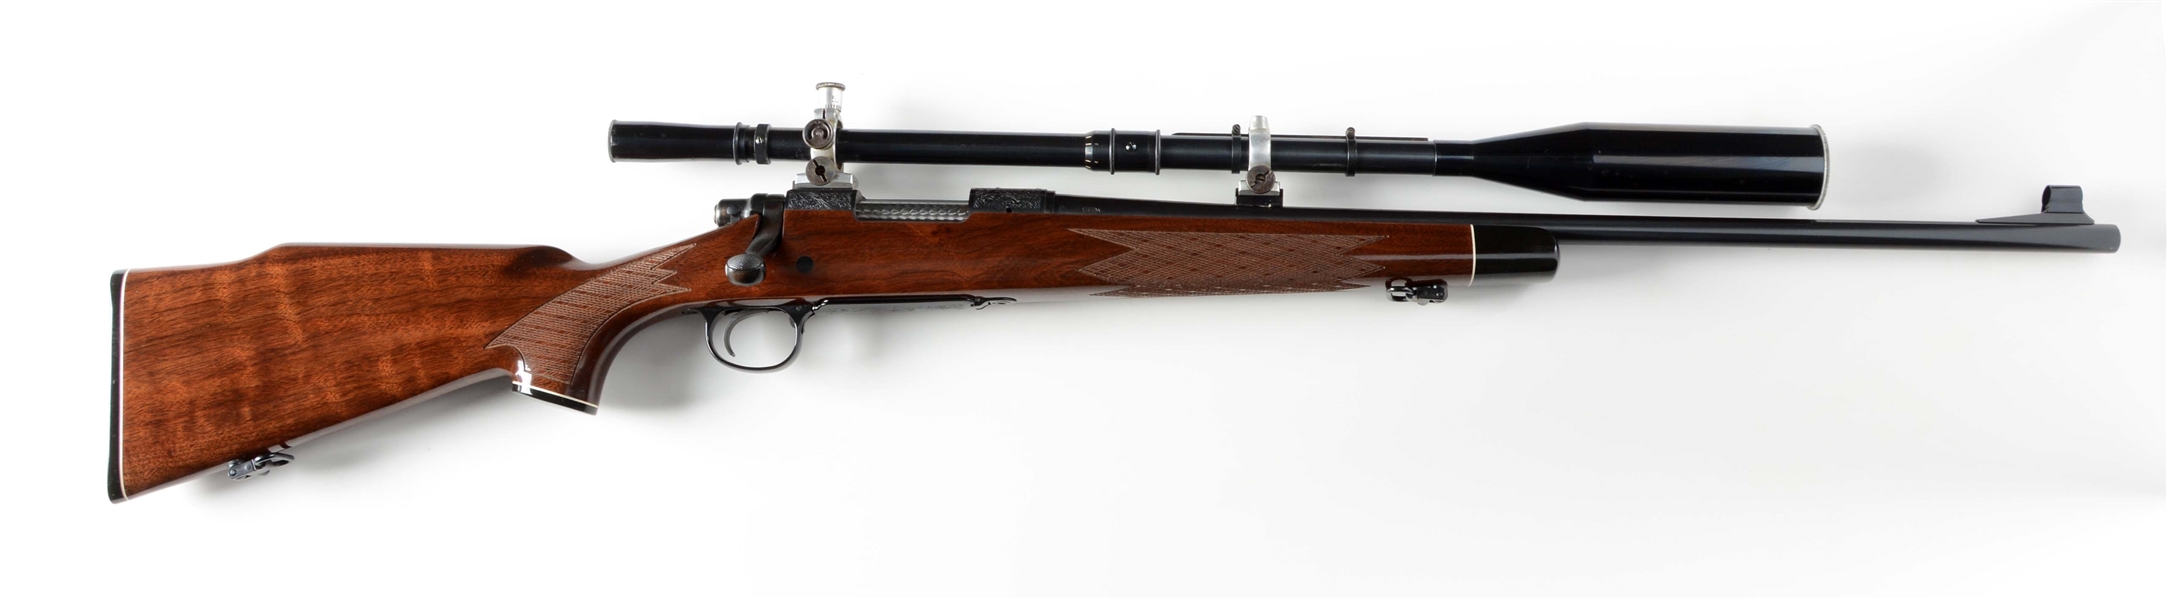 (M) DELUXE ENGRAVED REMINGTON MODEL 700 WITH FECKER SCOPE.